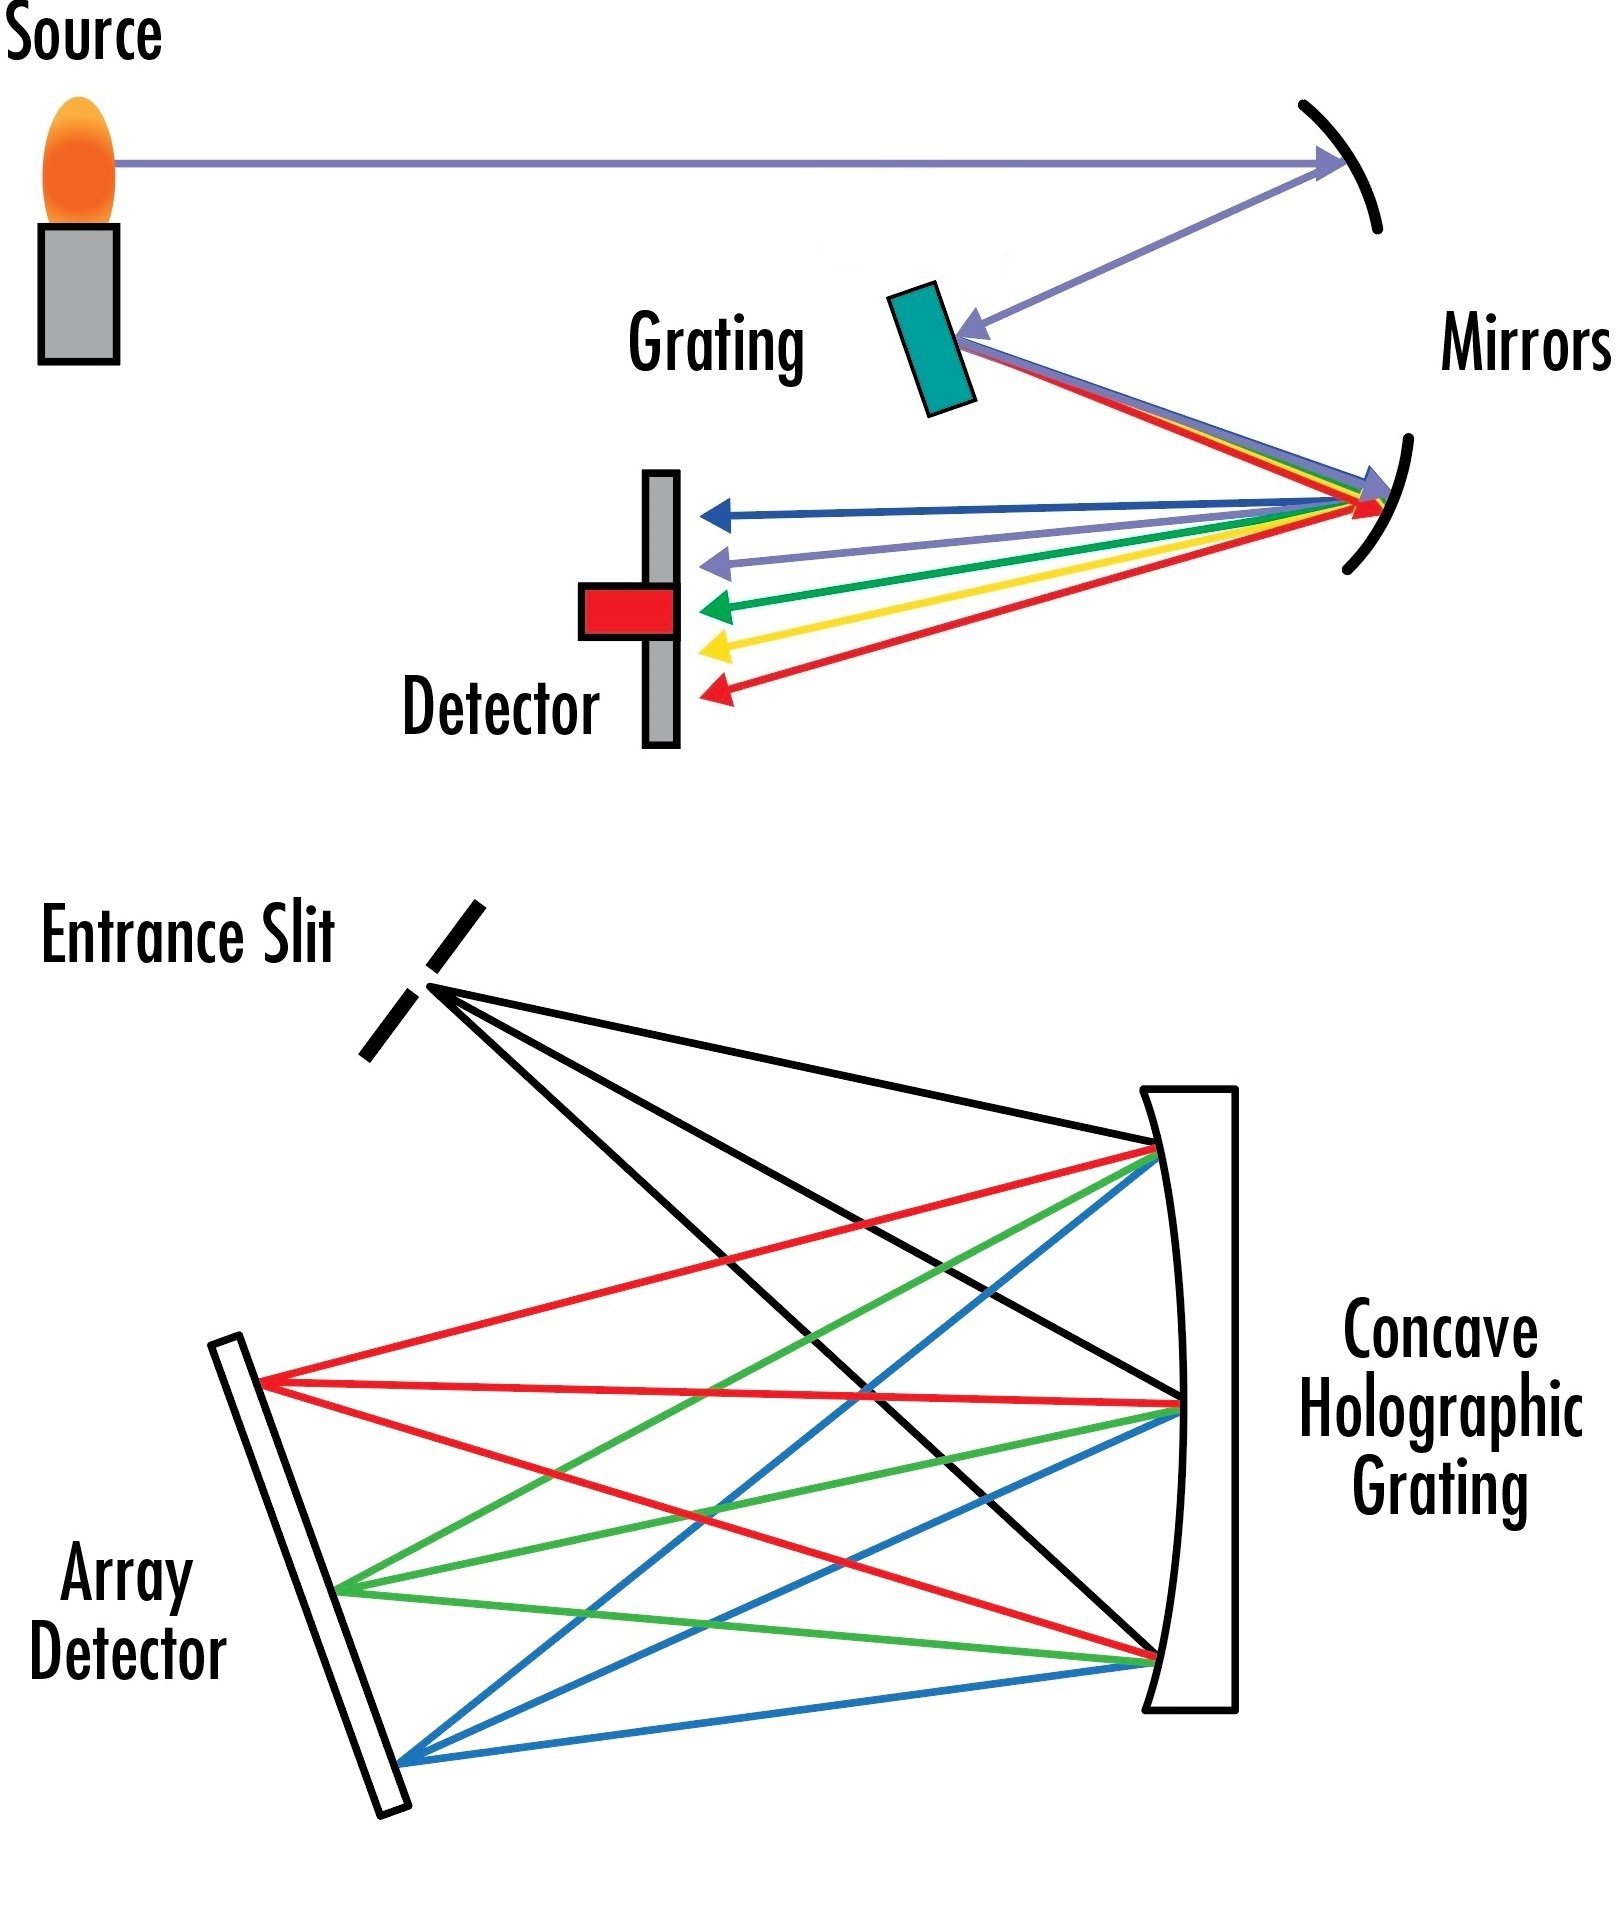 Both plane grating spectrographs (top) and concave grating spectrographs (bottom) use stationary gratings to separate incident wavelengths into different pixels on a detector array